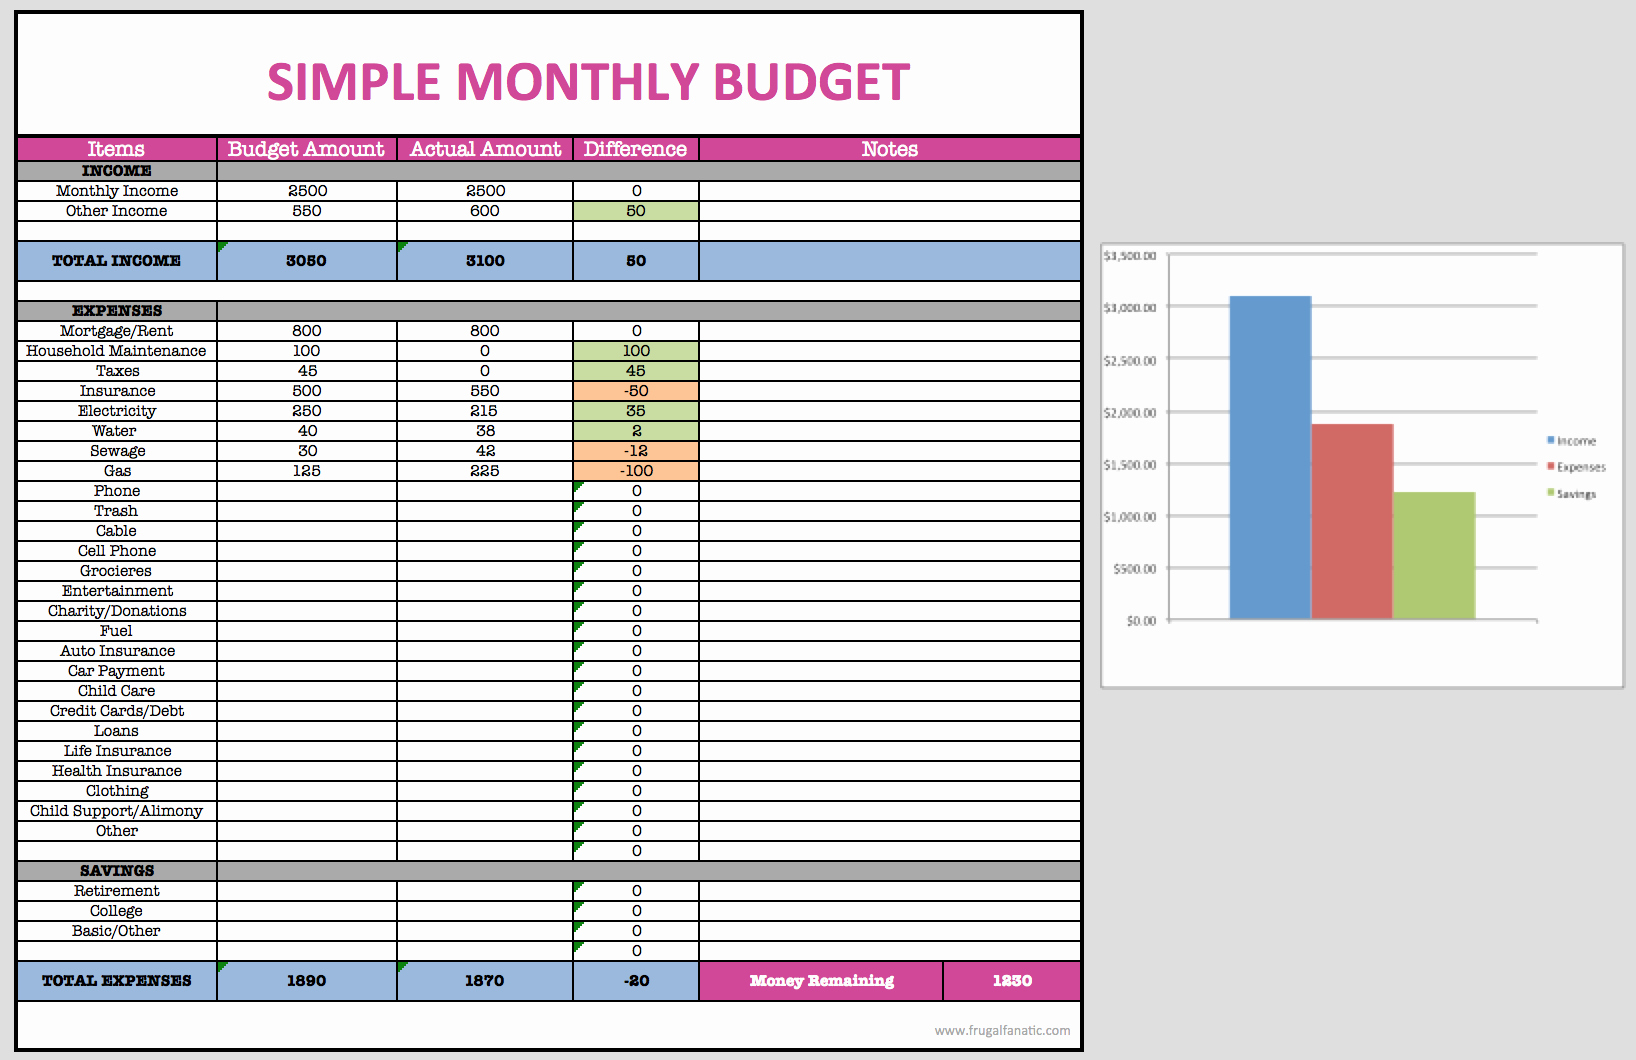 Simple Monthly Budget Template Excel Fresh Monthly Bud Spreadsheet Frugal Fanatic Shop